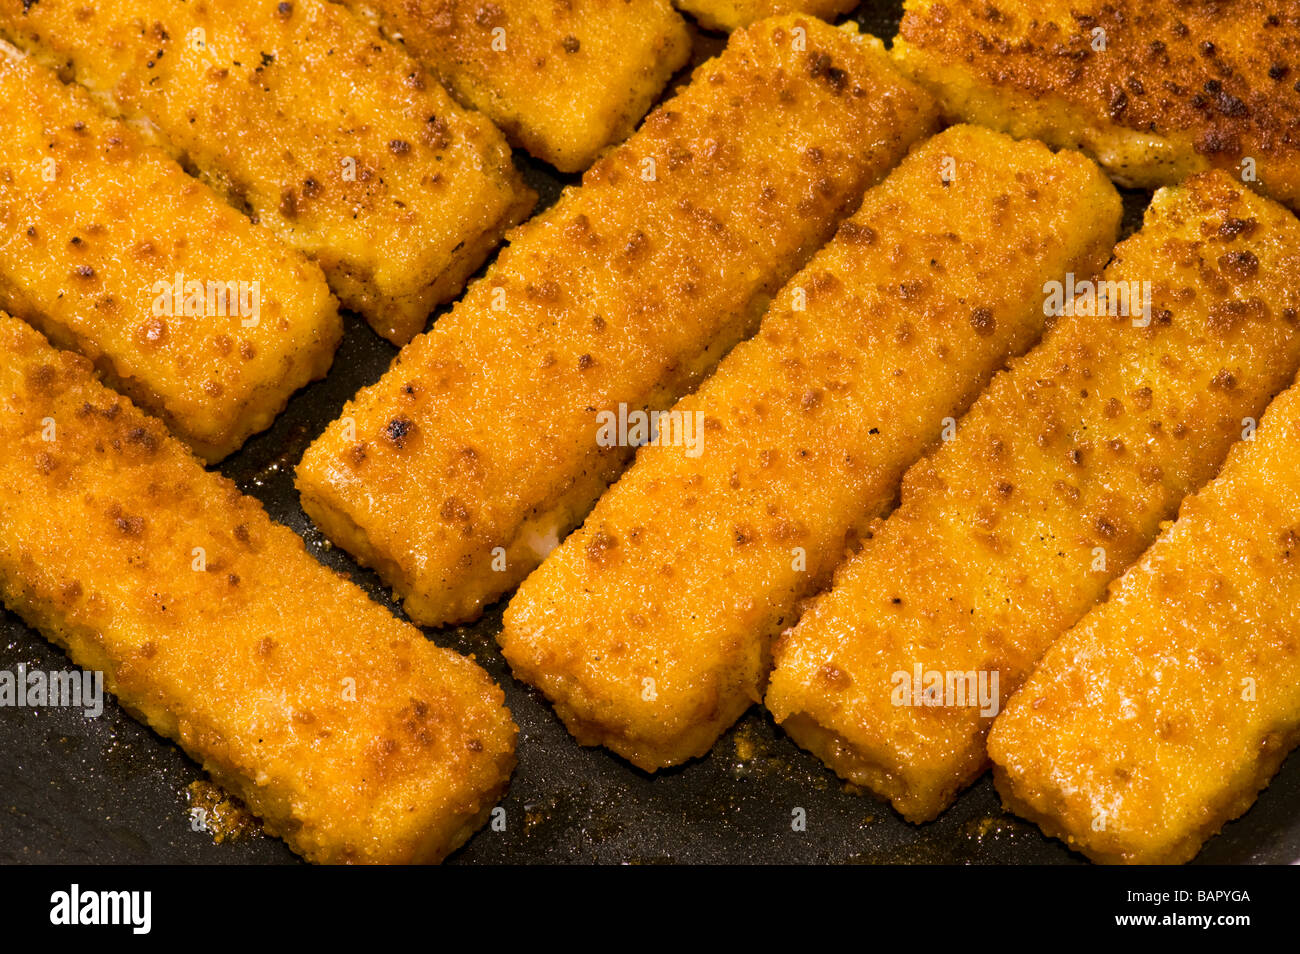 fried fish finger fish stick fry frying brown browning roast roasting roasted bake baking fat oil fryer fries seafood sea diet c Stock Photo